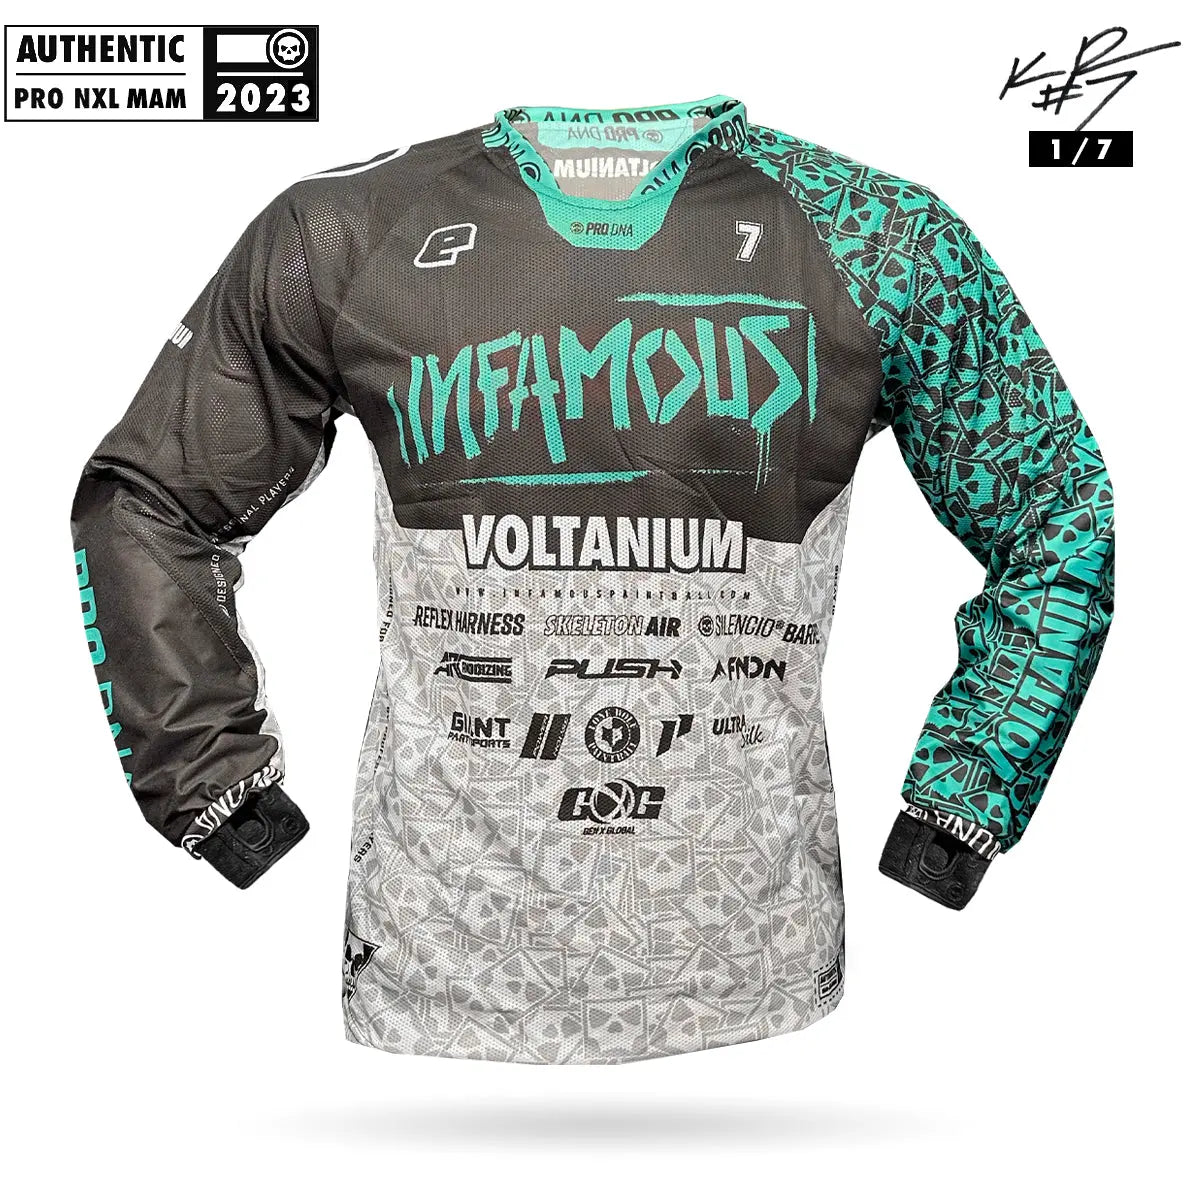 Infamous Kali Jersey - NXL MAM 2023 Infamous Paintball